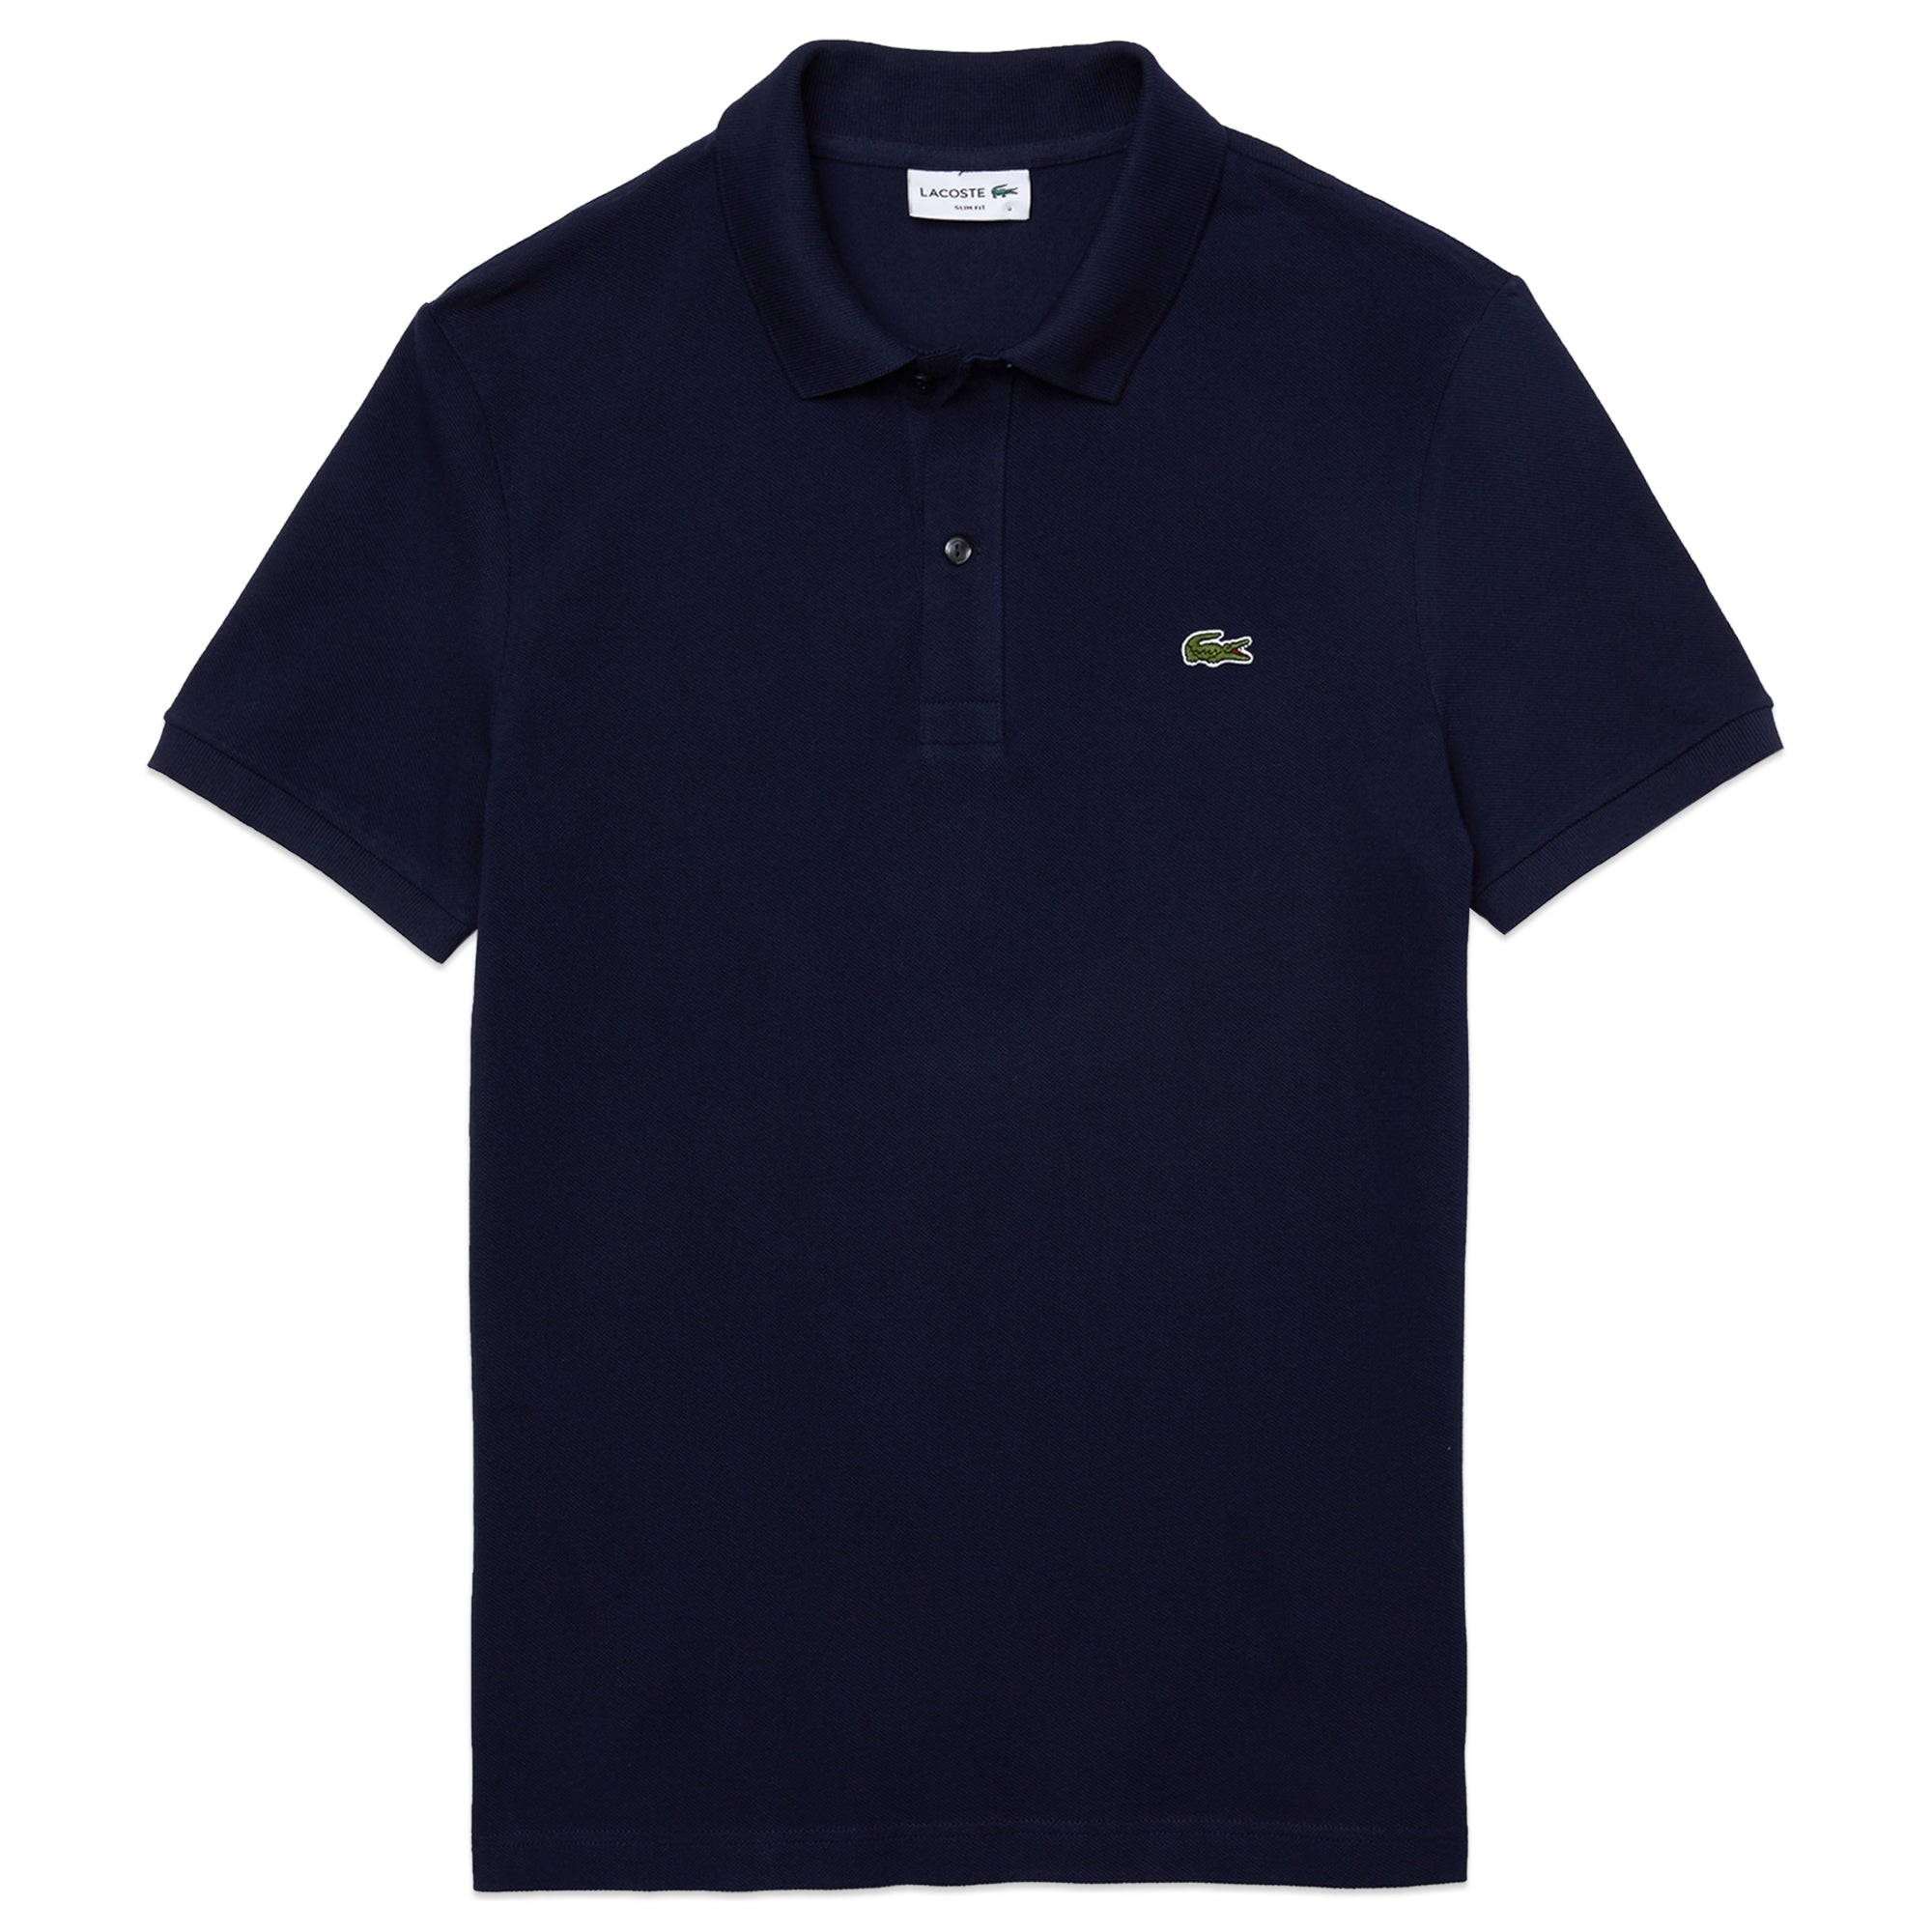 Lacoste Short Sleeved Blue PH4012 Polo - Argentina Slim Fit